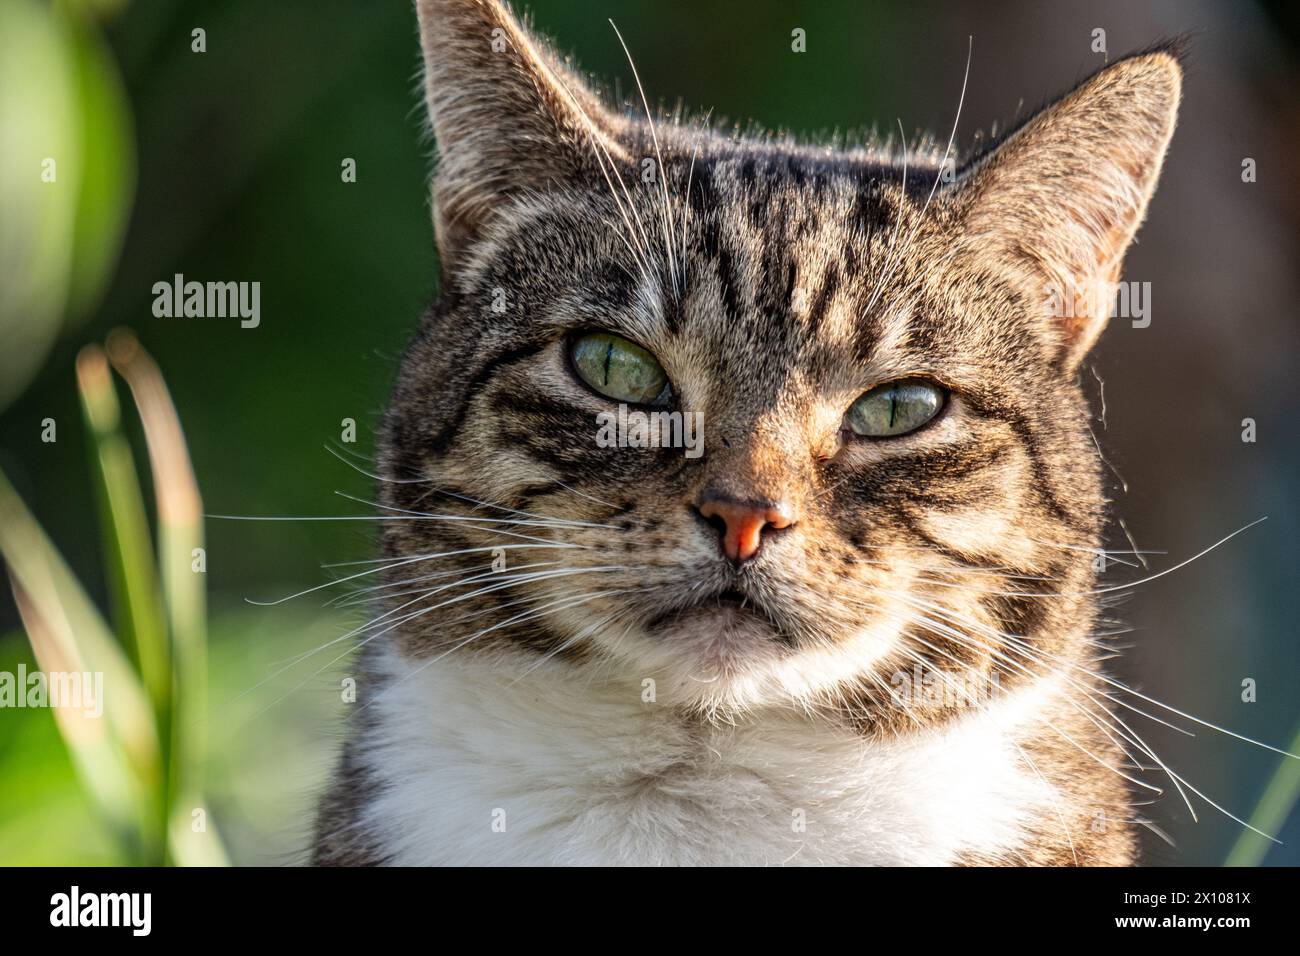 Close up of a tabby cat with piercing green eyes and distinctive facial markings, gazing intently. Serene yet alert, ideal for pet themed content. Hig Stock Photo